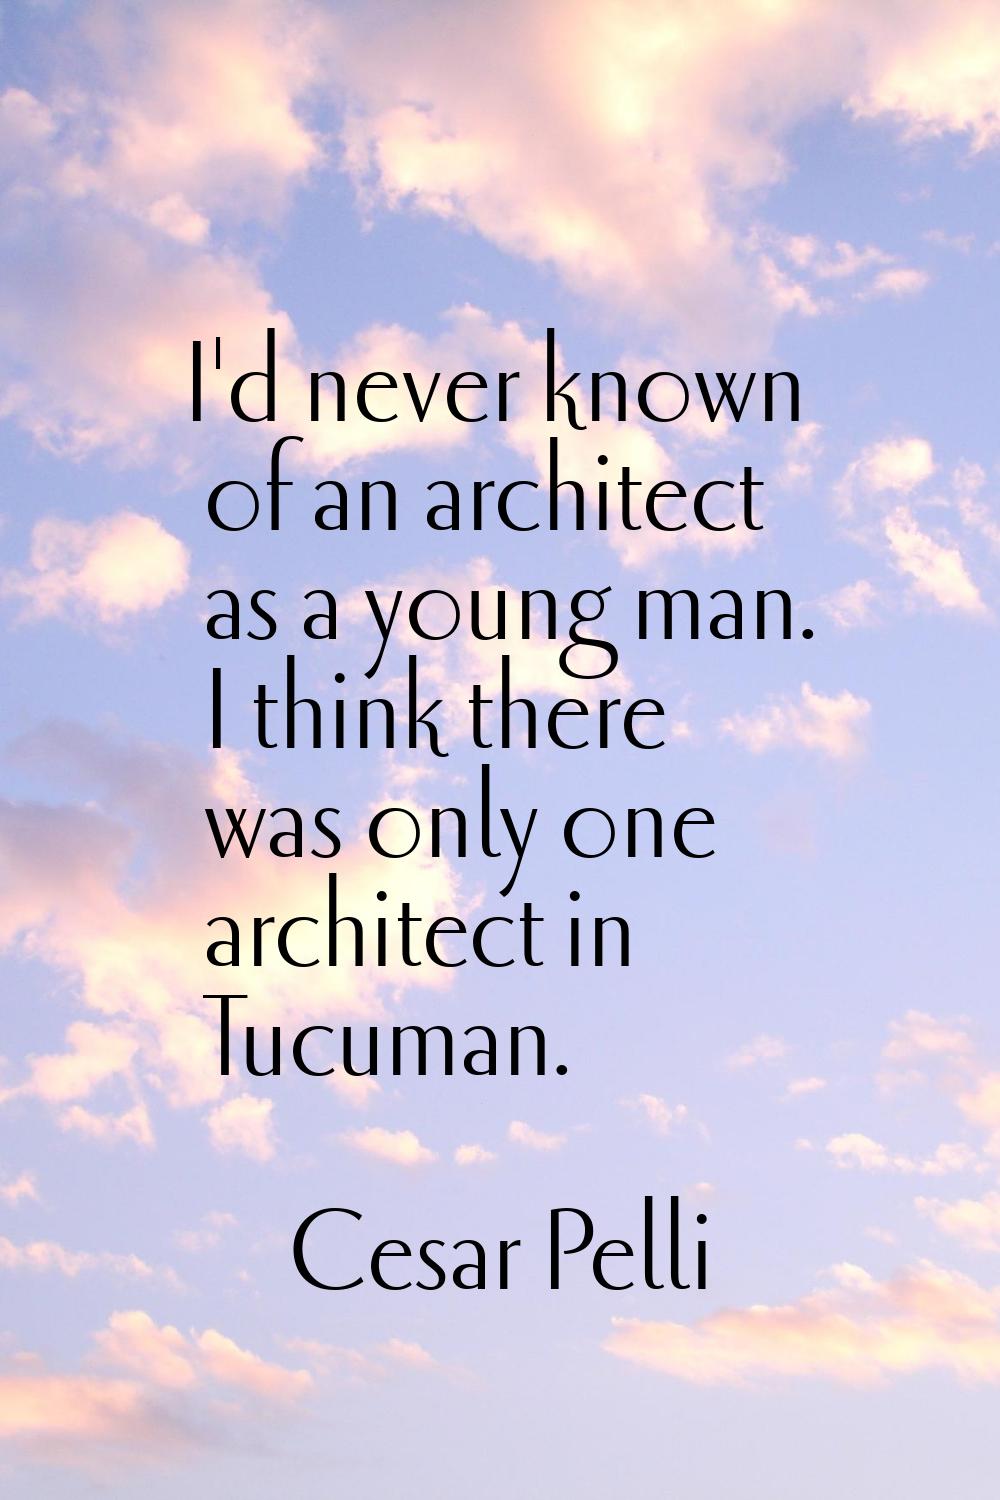 I'd never known of an architect as a young man. I think there was only one architect in Tucuman.